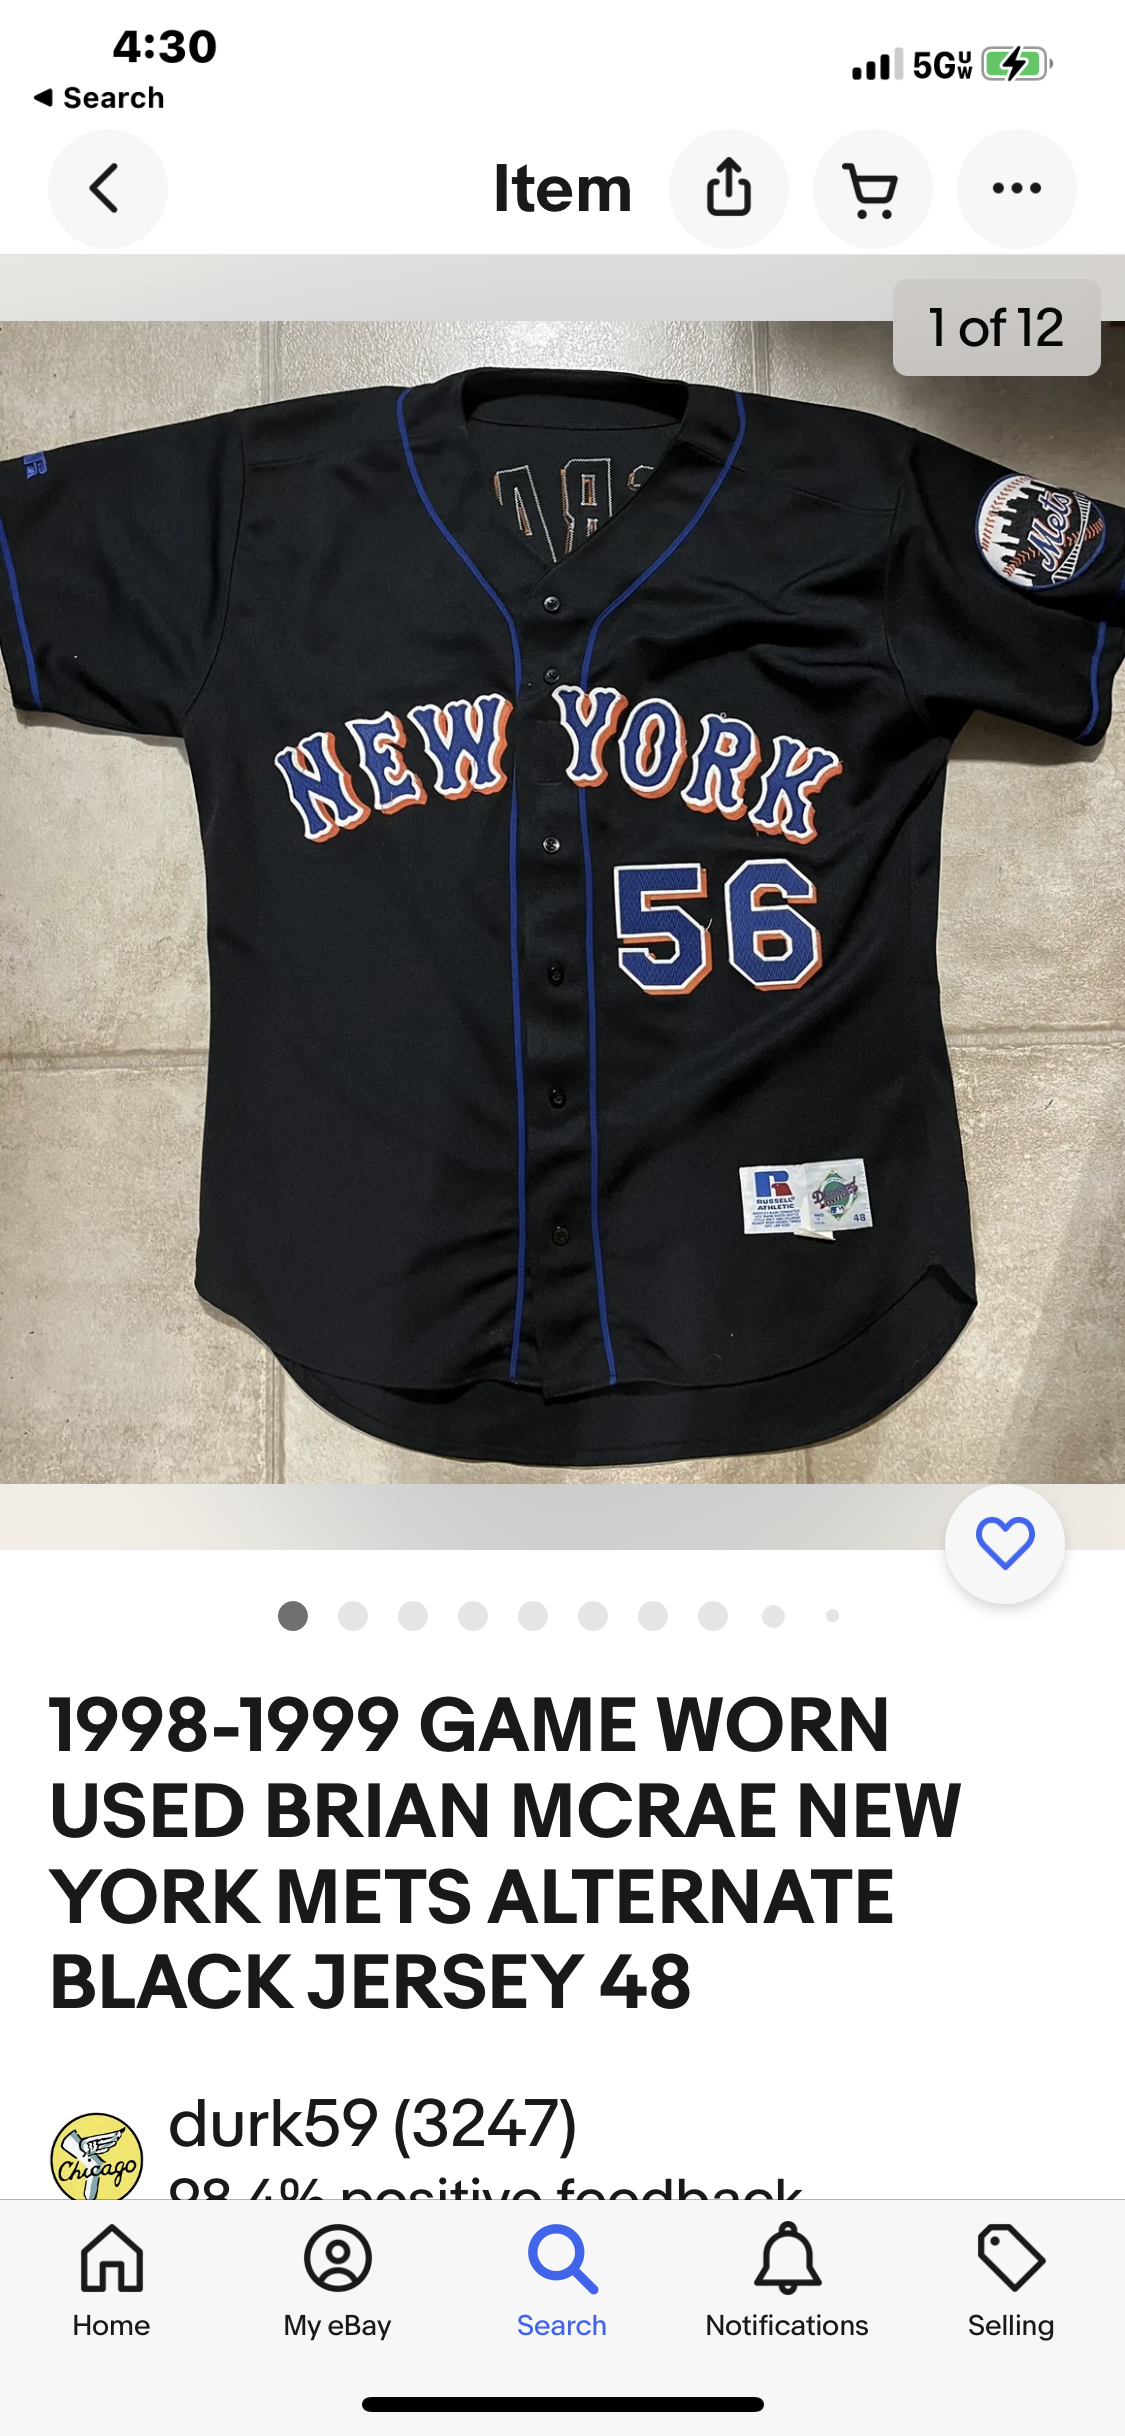  Really Rare Game Used Road Mets Jersey